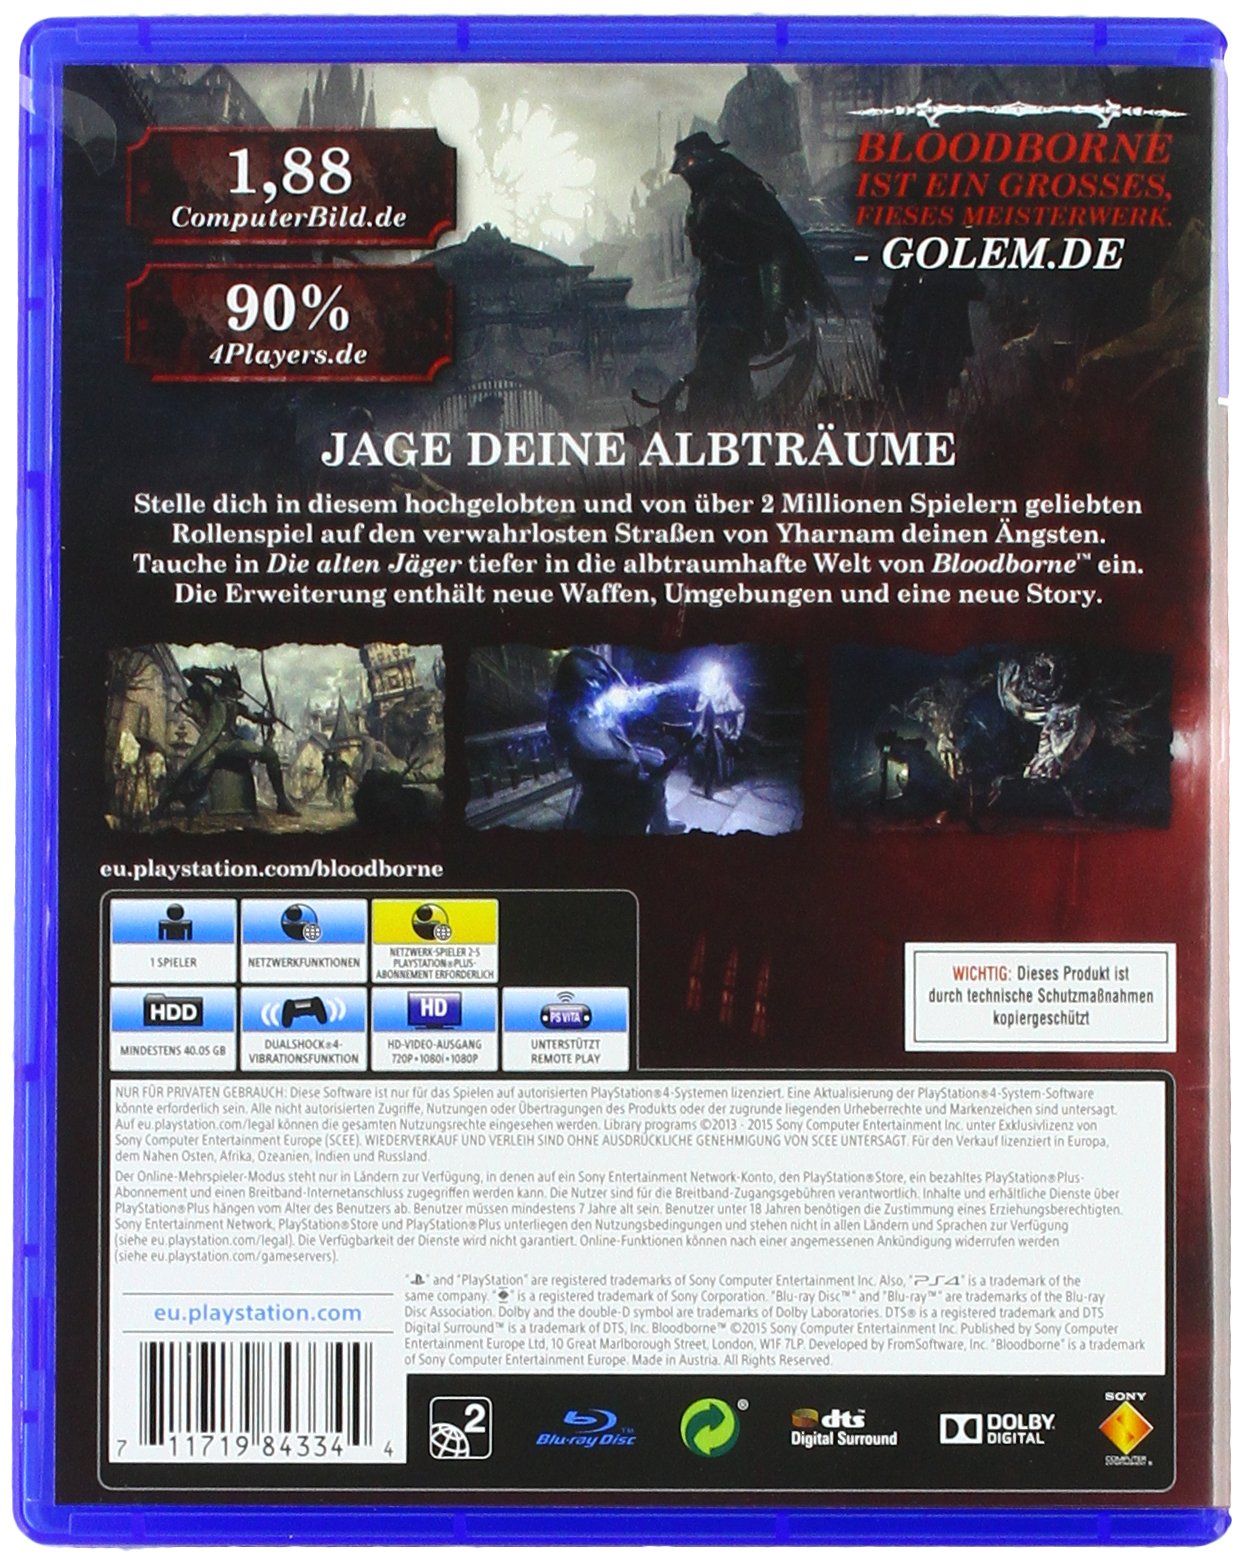 Bloodborne – Game of the Year Edition – [PlayStation 4]